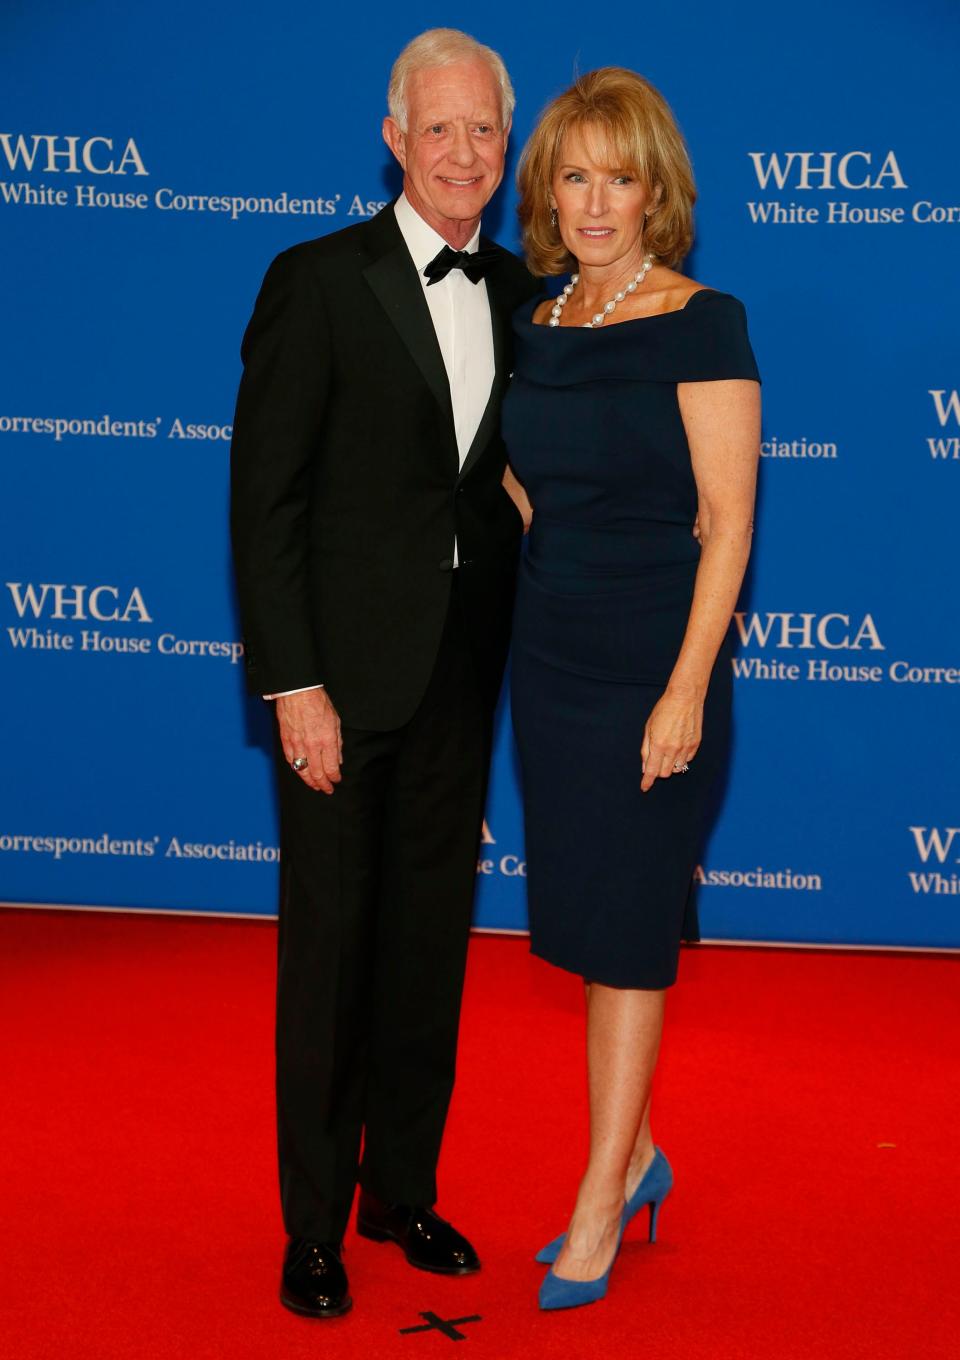 WASHINGTON, DC - APRIL 27: Sully Sullenberger attends the 2019 White House Correspondents' Association Dinner at Washington Hilton on April 27, 2019 in Washington, DC. (Photo by Paul Morigi/Getty Images) ORG XMIT: 775334129 ORIG FILE ID: 1145522938